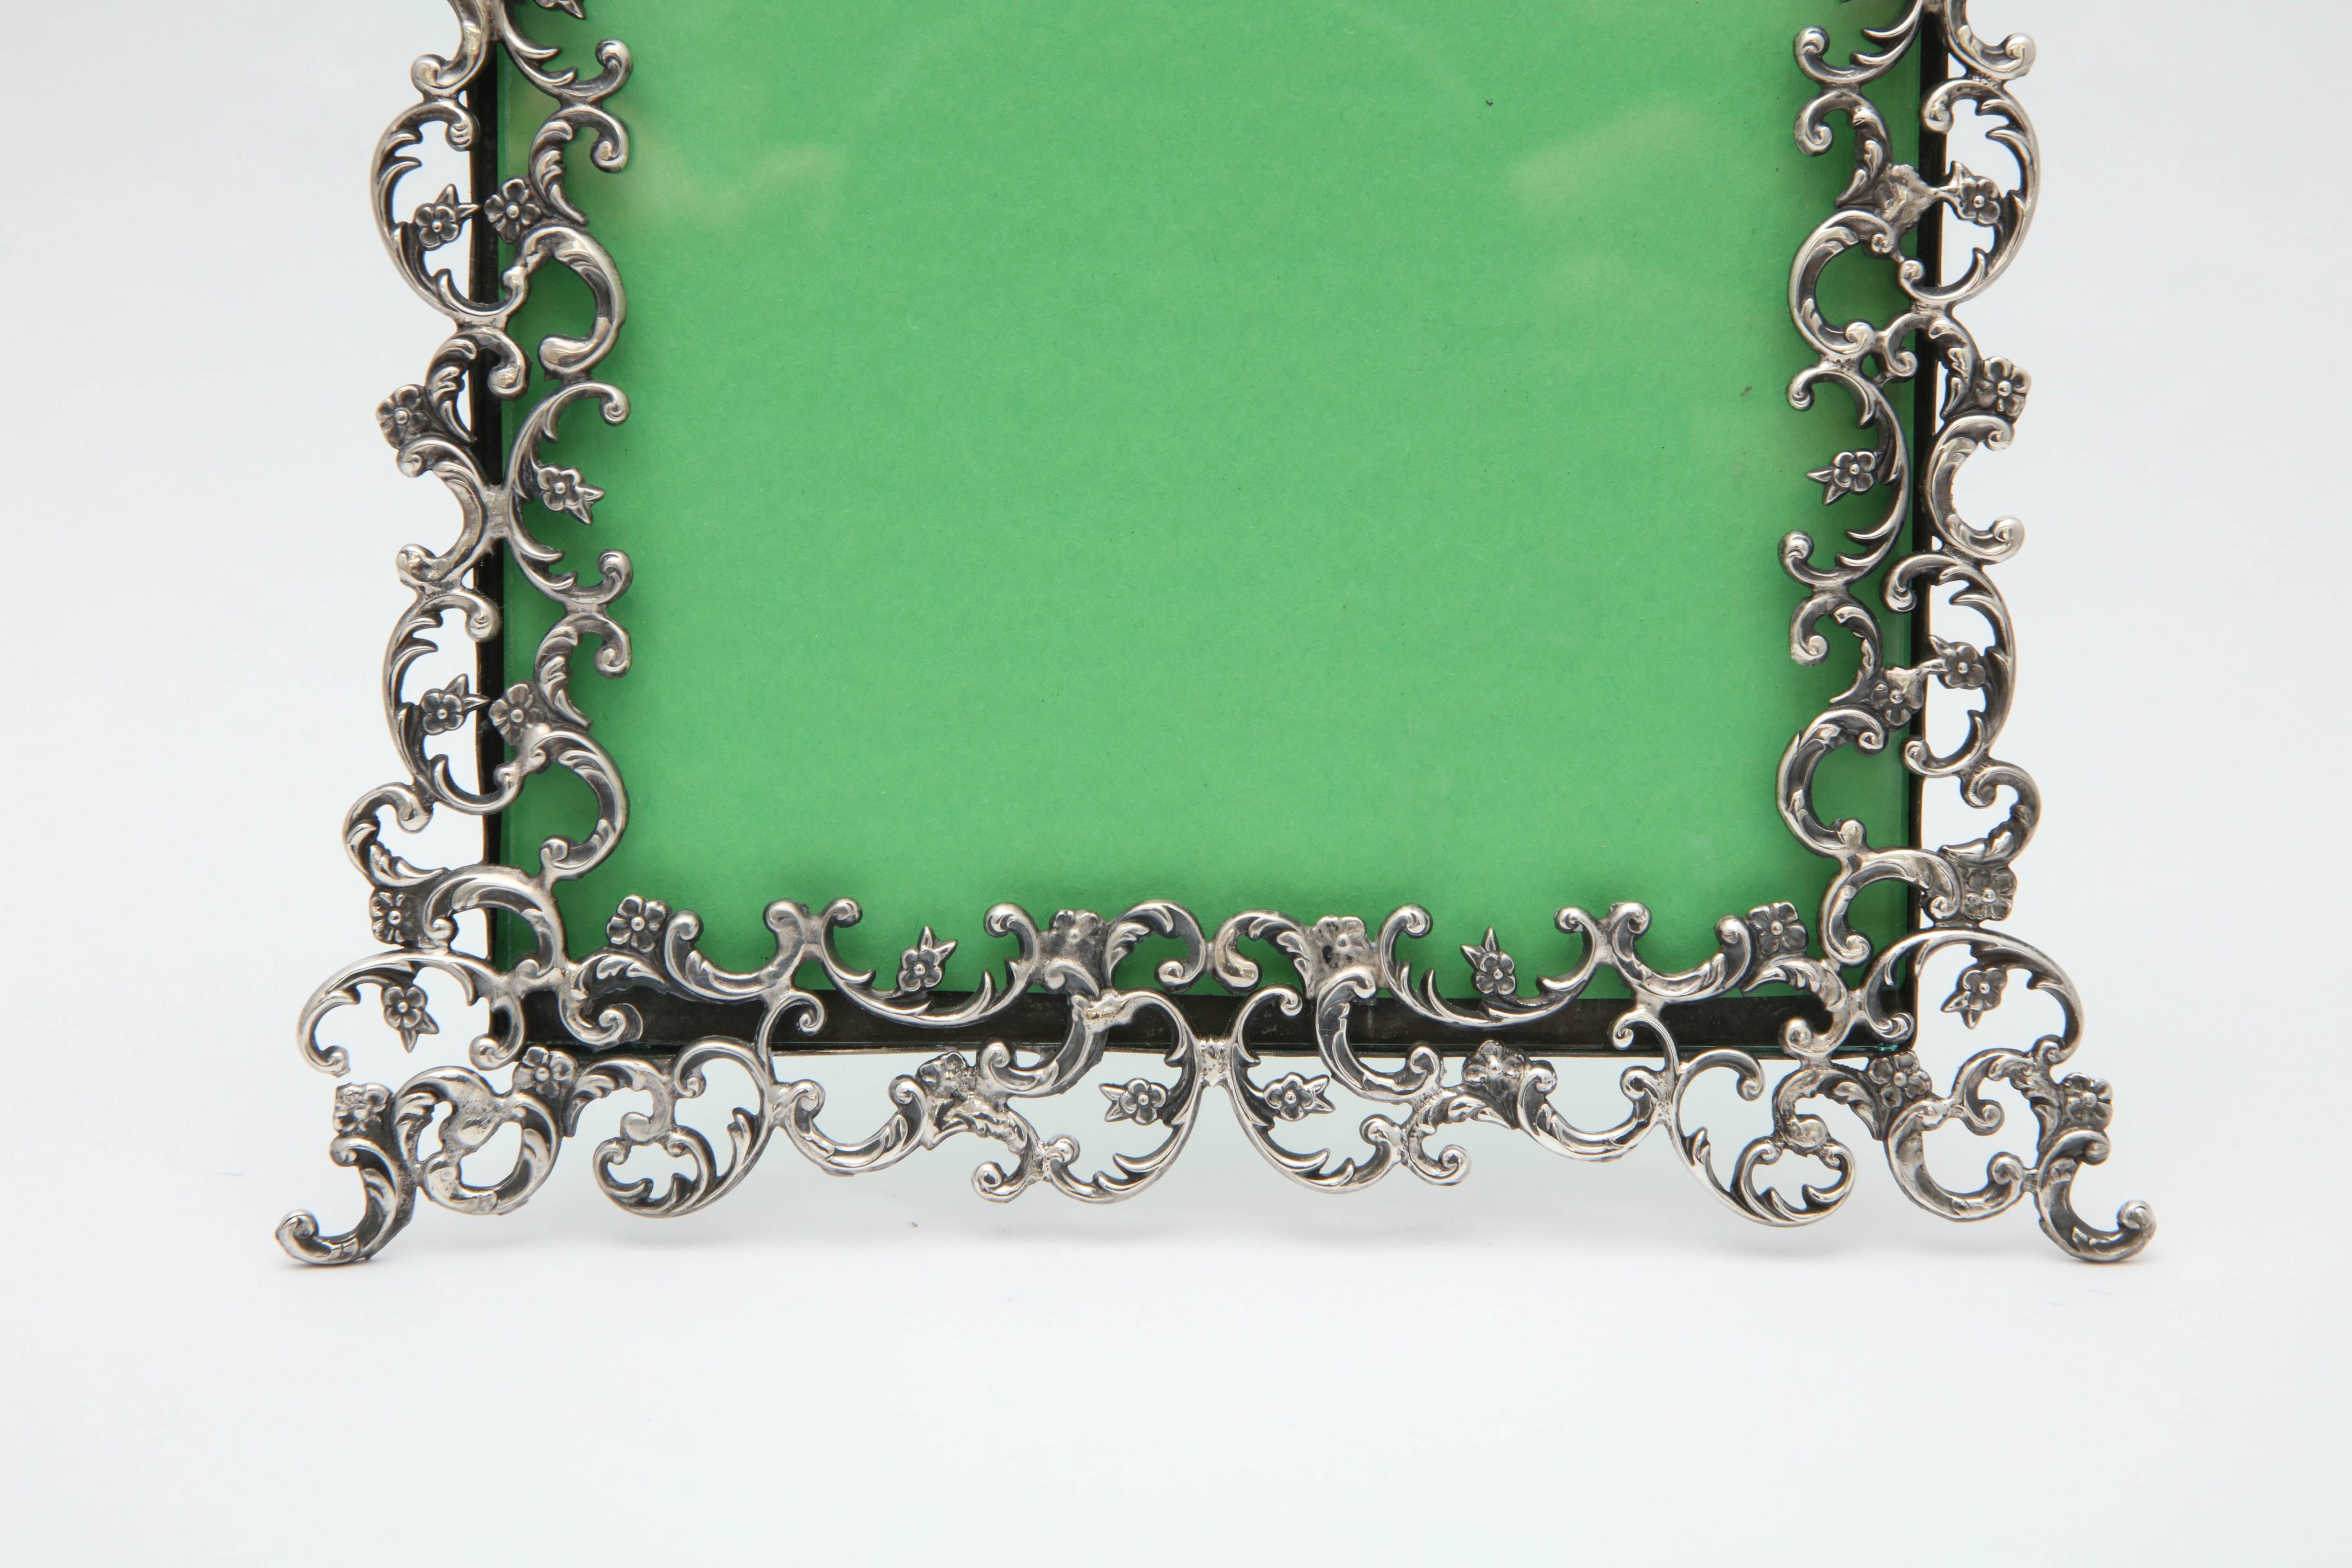 Victorian, sterling silver picture frame, American, circa 1895. Easel of frame is also sterling silver. Measures: 5 3/4 inches wide x 8 inches high (at highest point) x 5 1/4 inches deep when sterling easel is in open position. Will show a photo 4